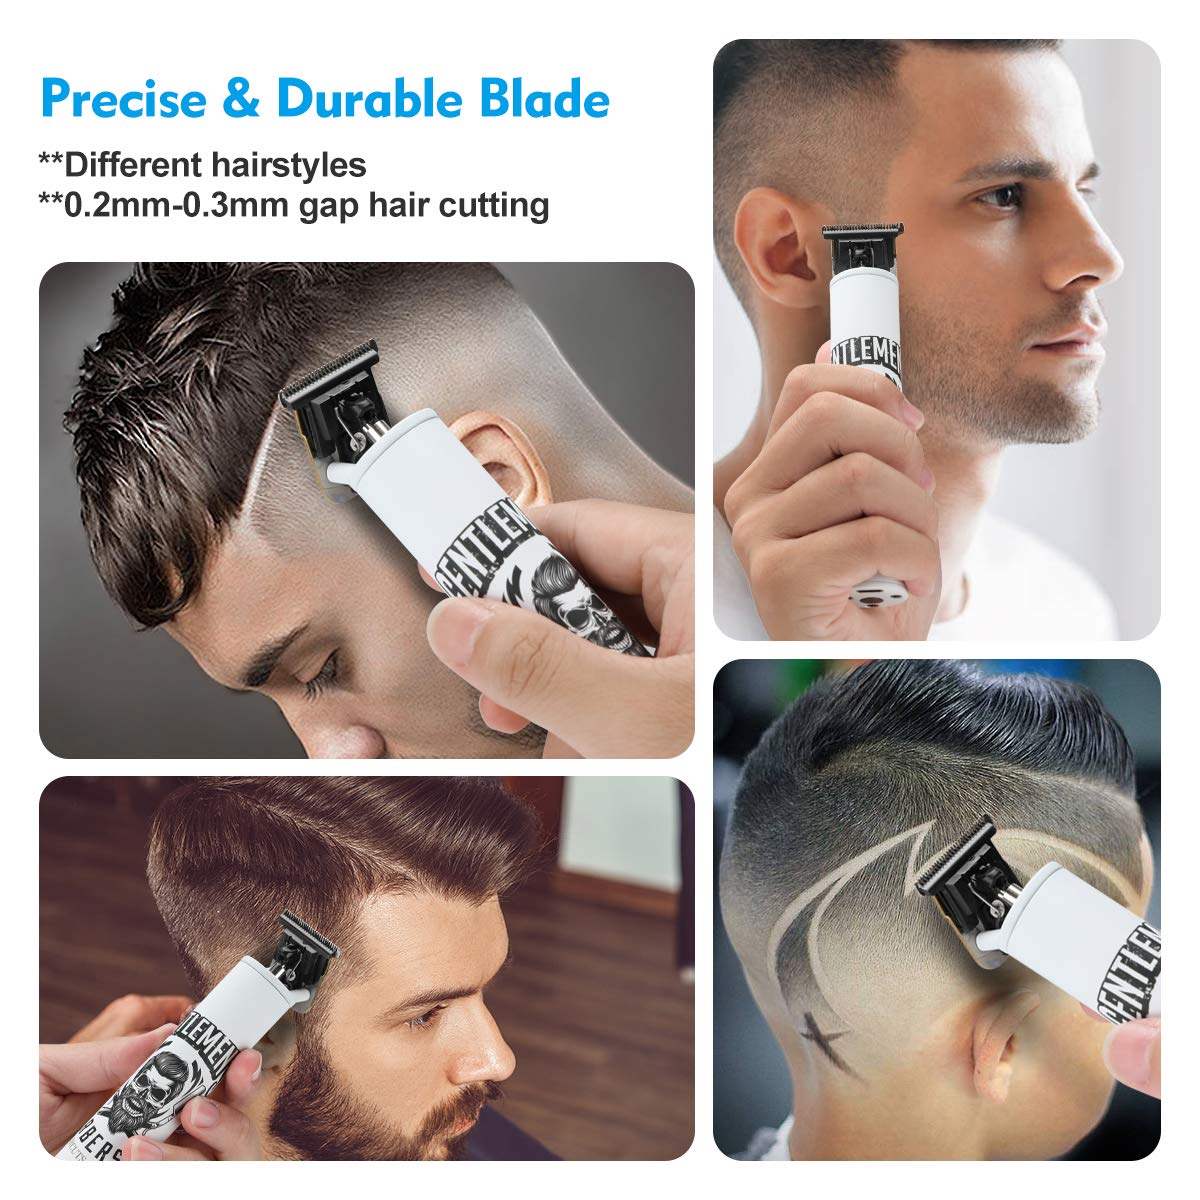 Electric Pro Li Outliner Clippers Barber Grooming Kit - 2